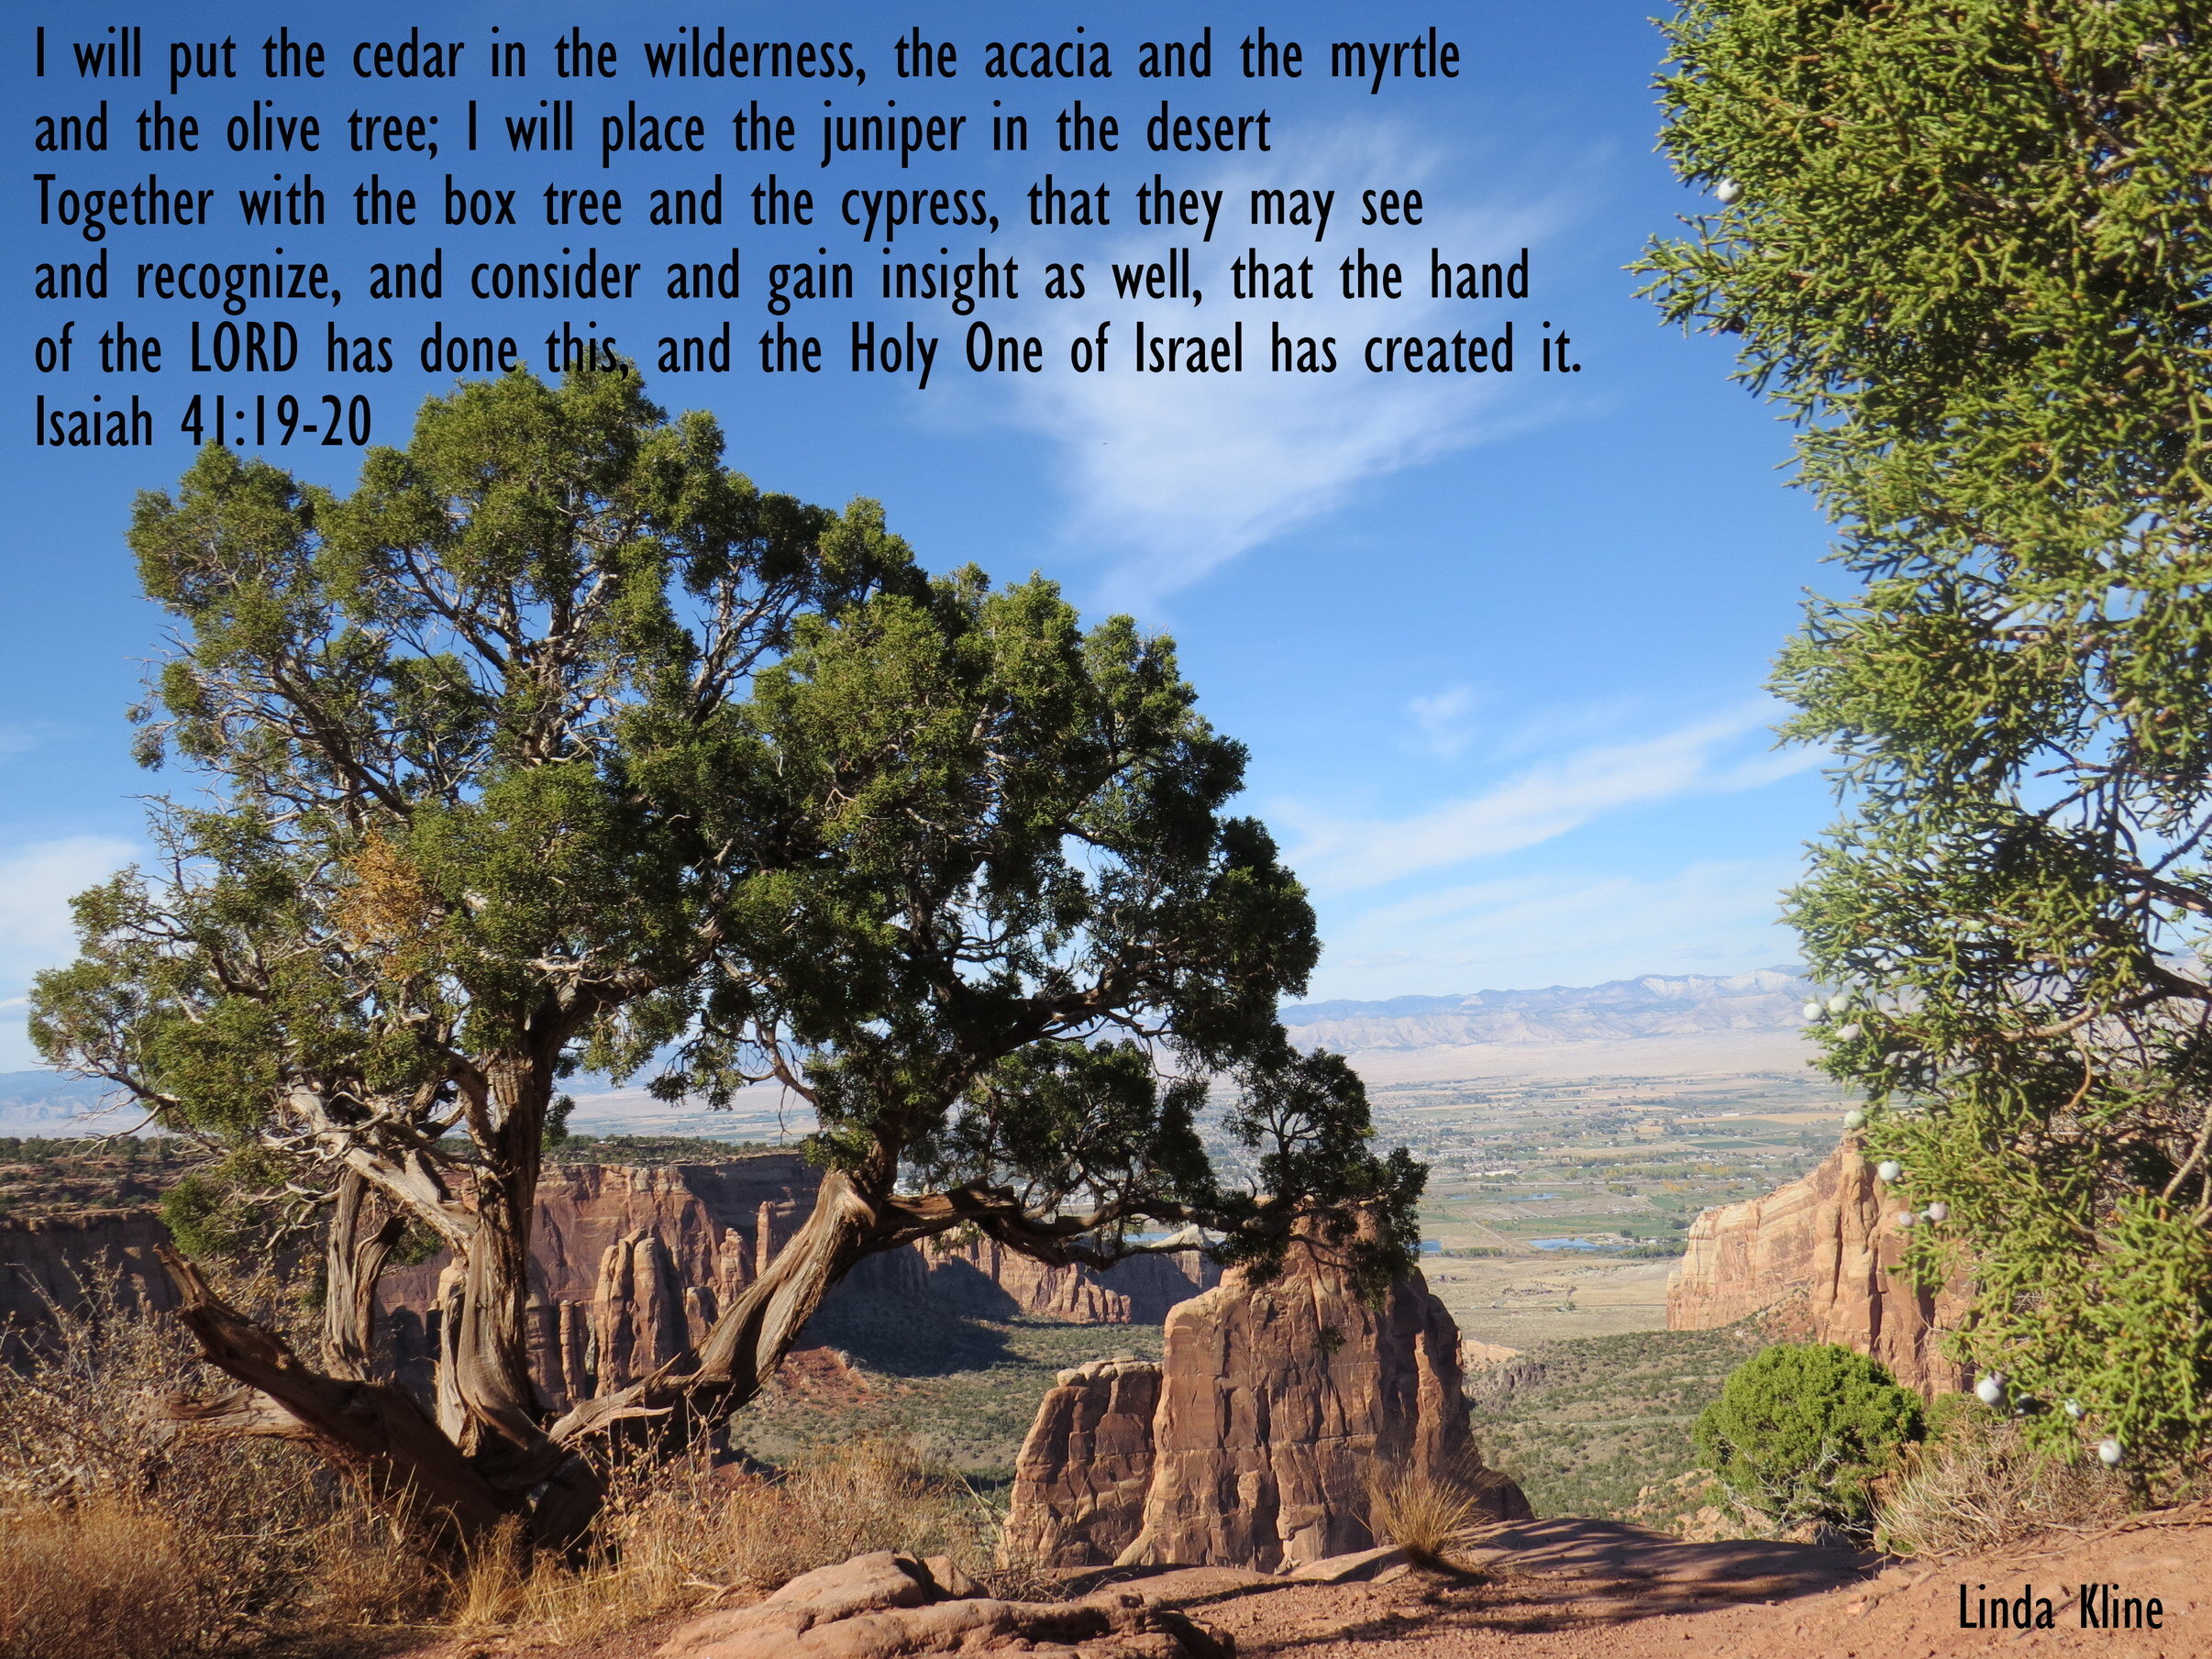 059-fb cedar in wilderness 20161013_Grand Junction and Colorado National Monument_0140.JPG